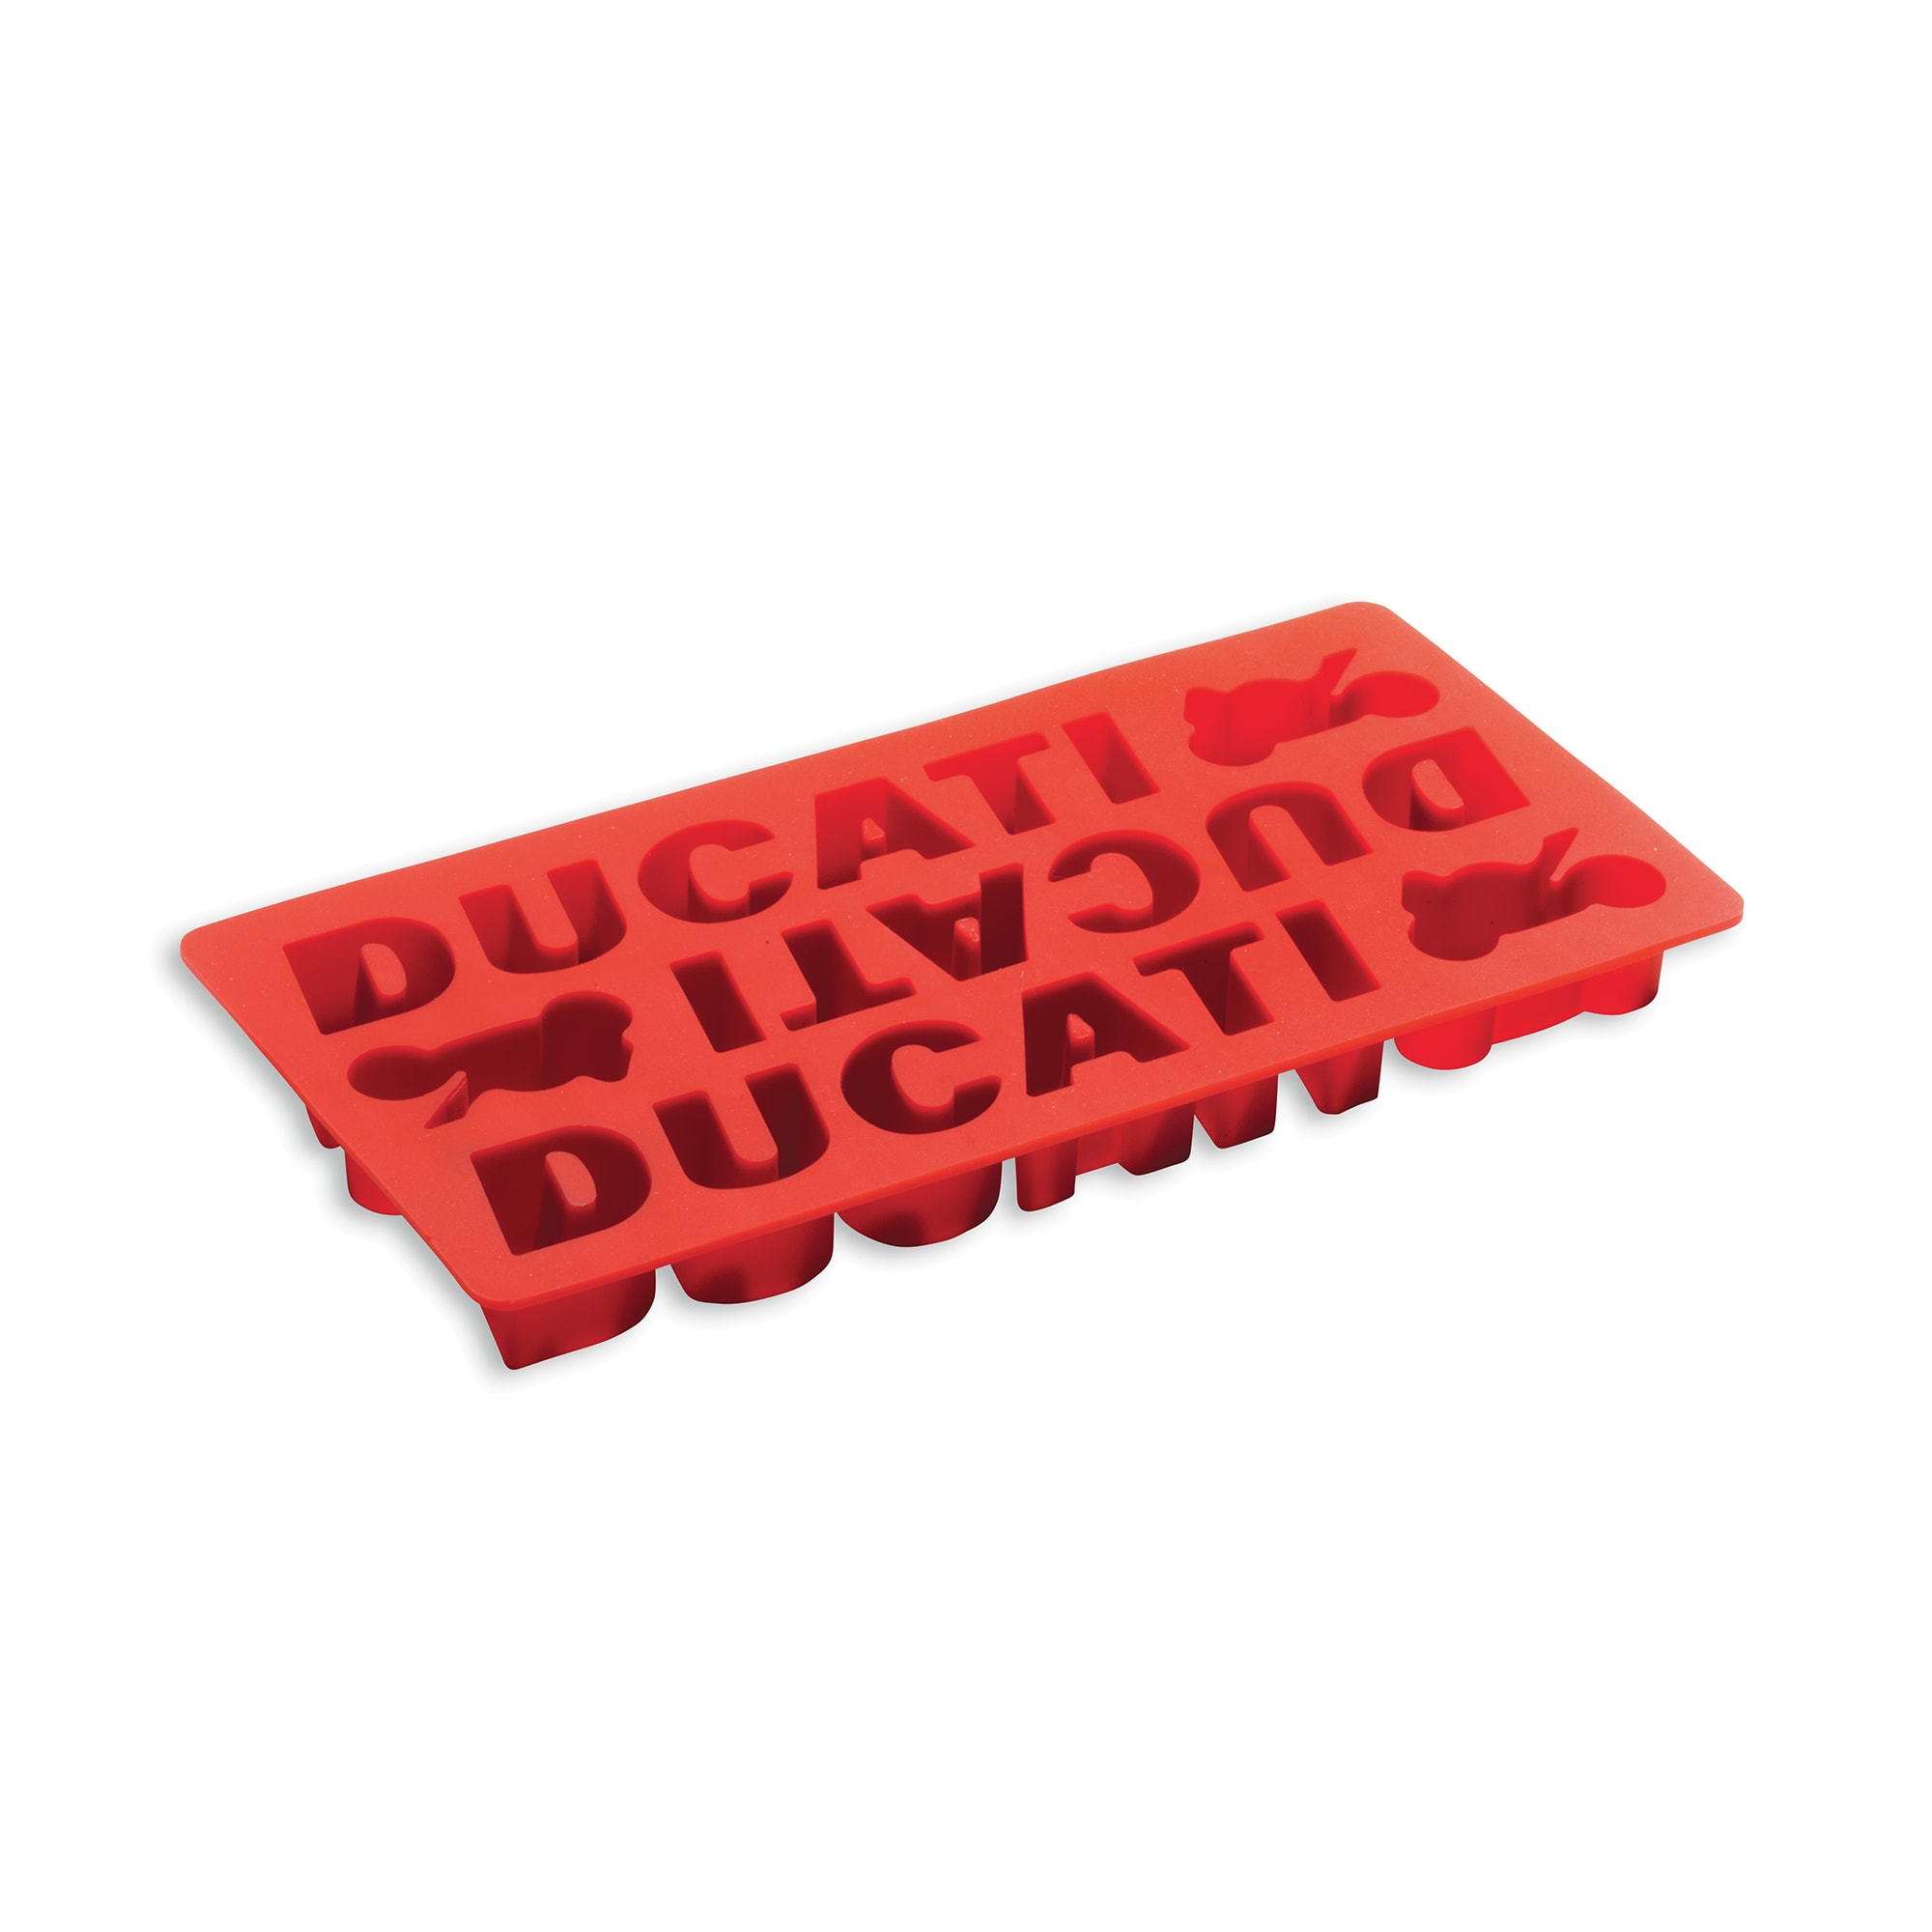 Ducati kitchen - Trays for ice and oven